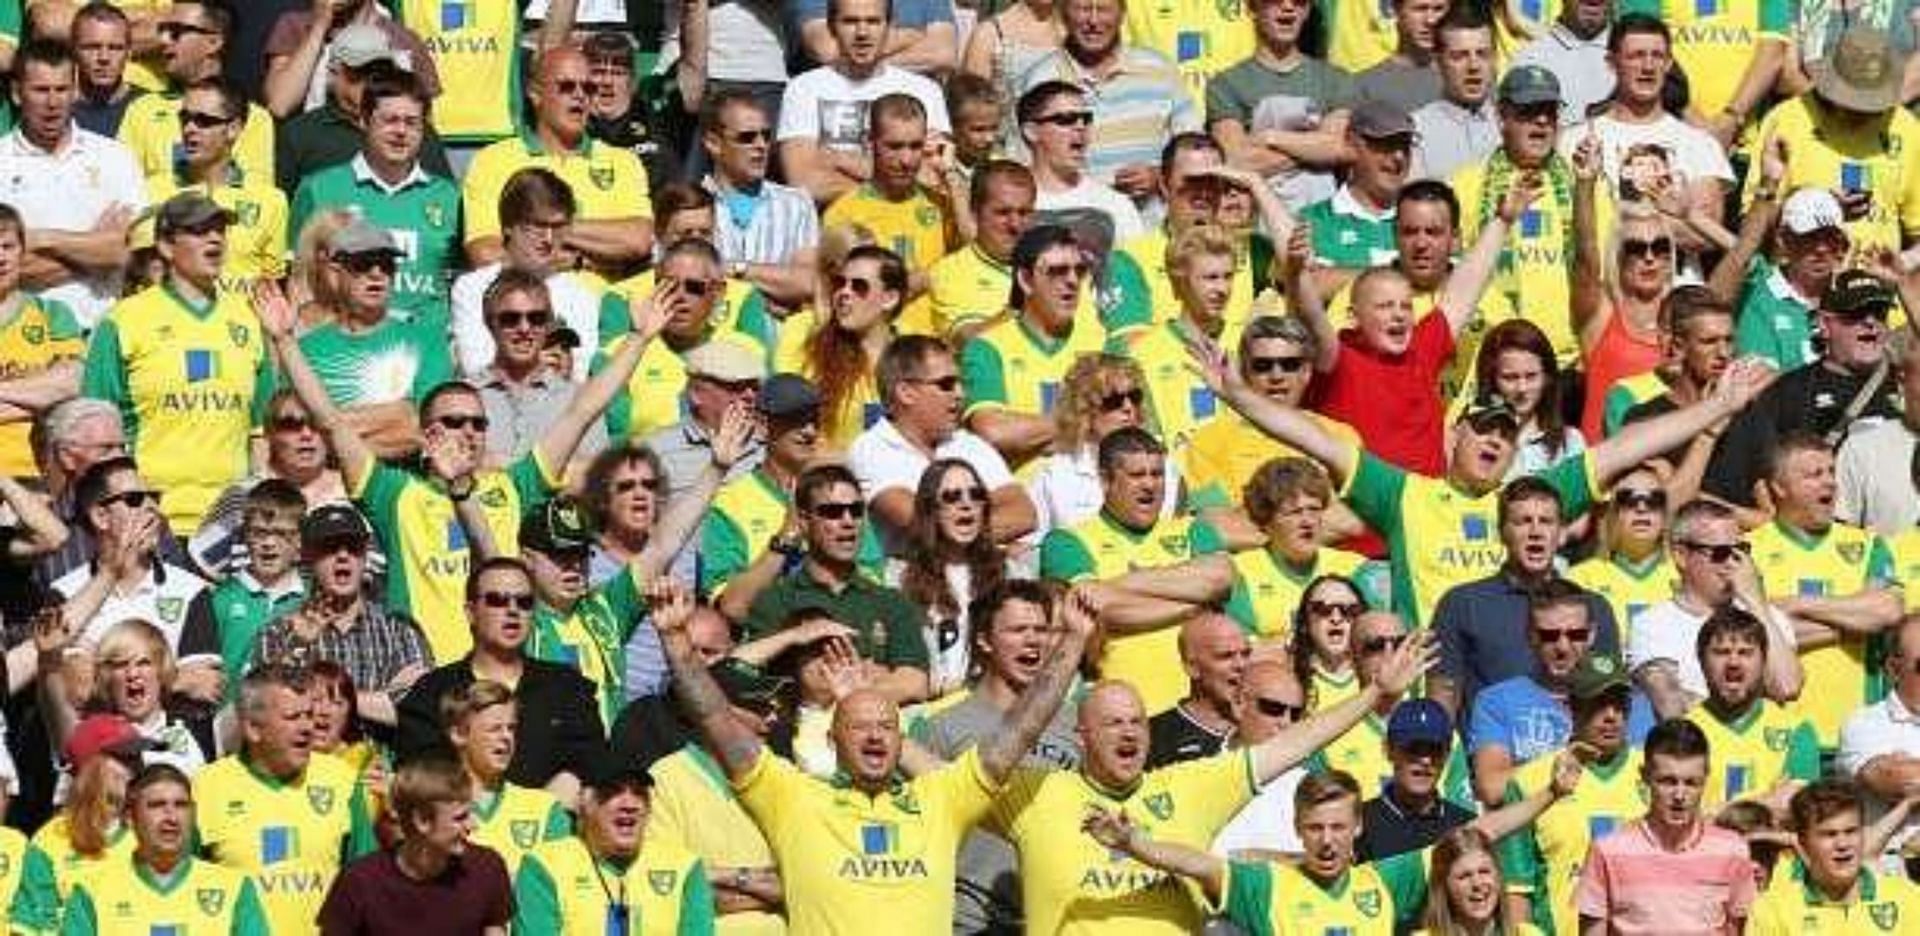 The Norwich colours are identical to the green and gold adopted by United fans when they were protesting the takeover of the club by the Glazers.